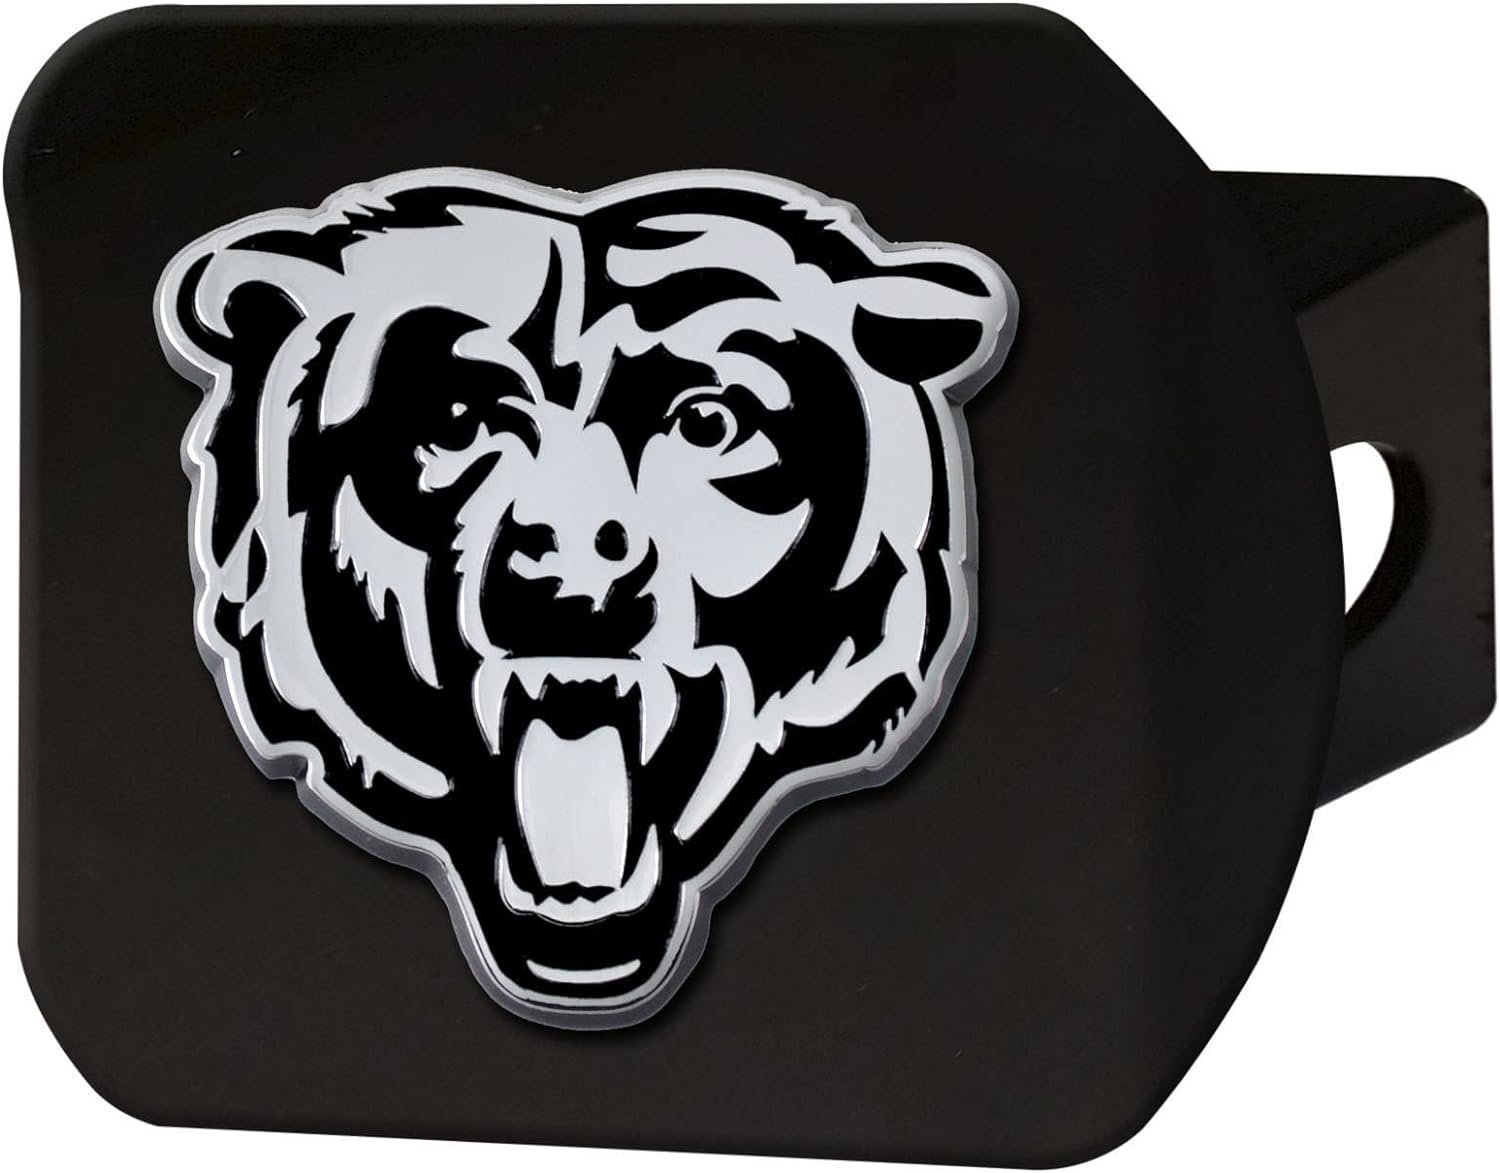 Chicago Bears Mascot Logo Solid Black Metal Hitch Cover with Metal Emblem 2 Inch Square Type III